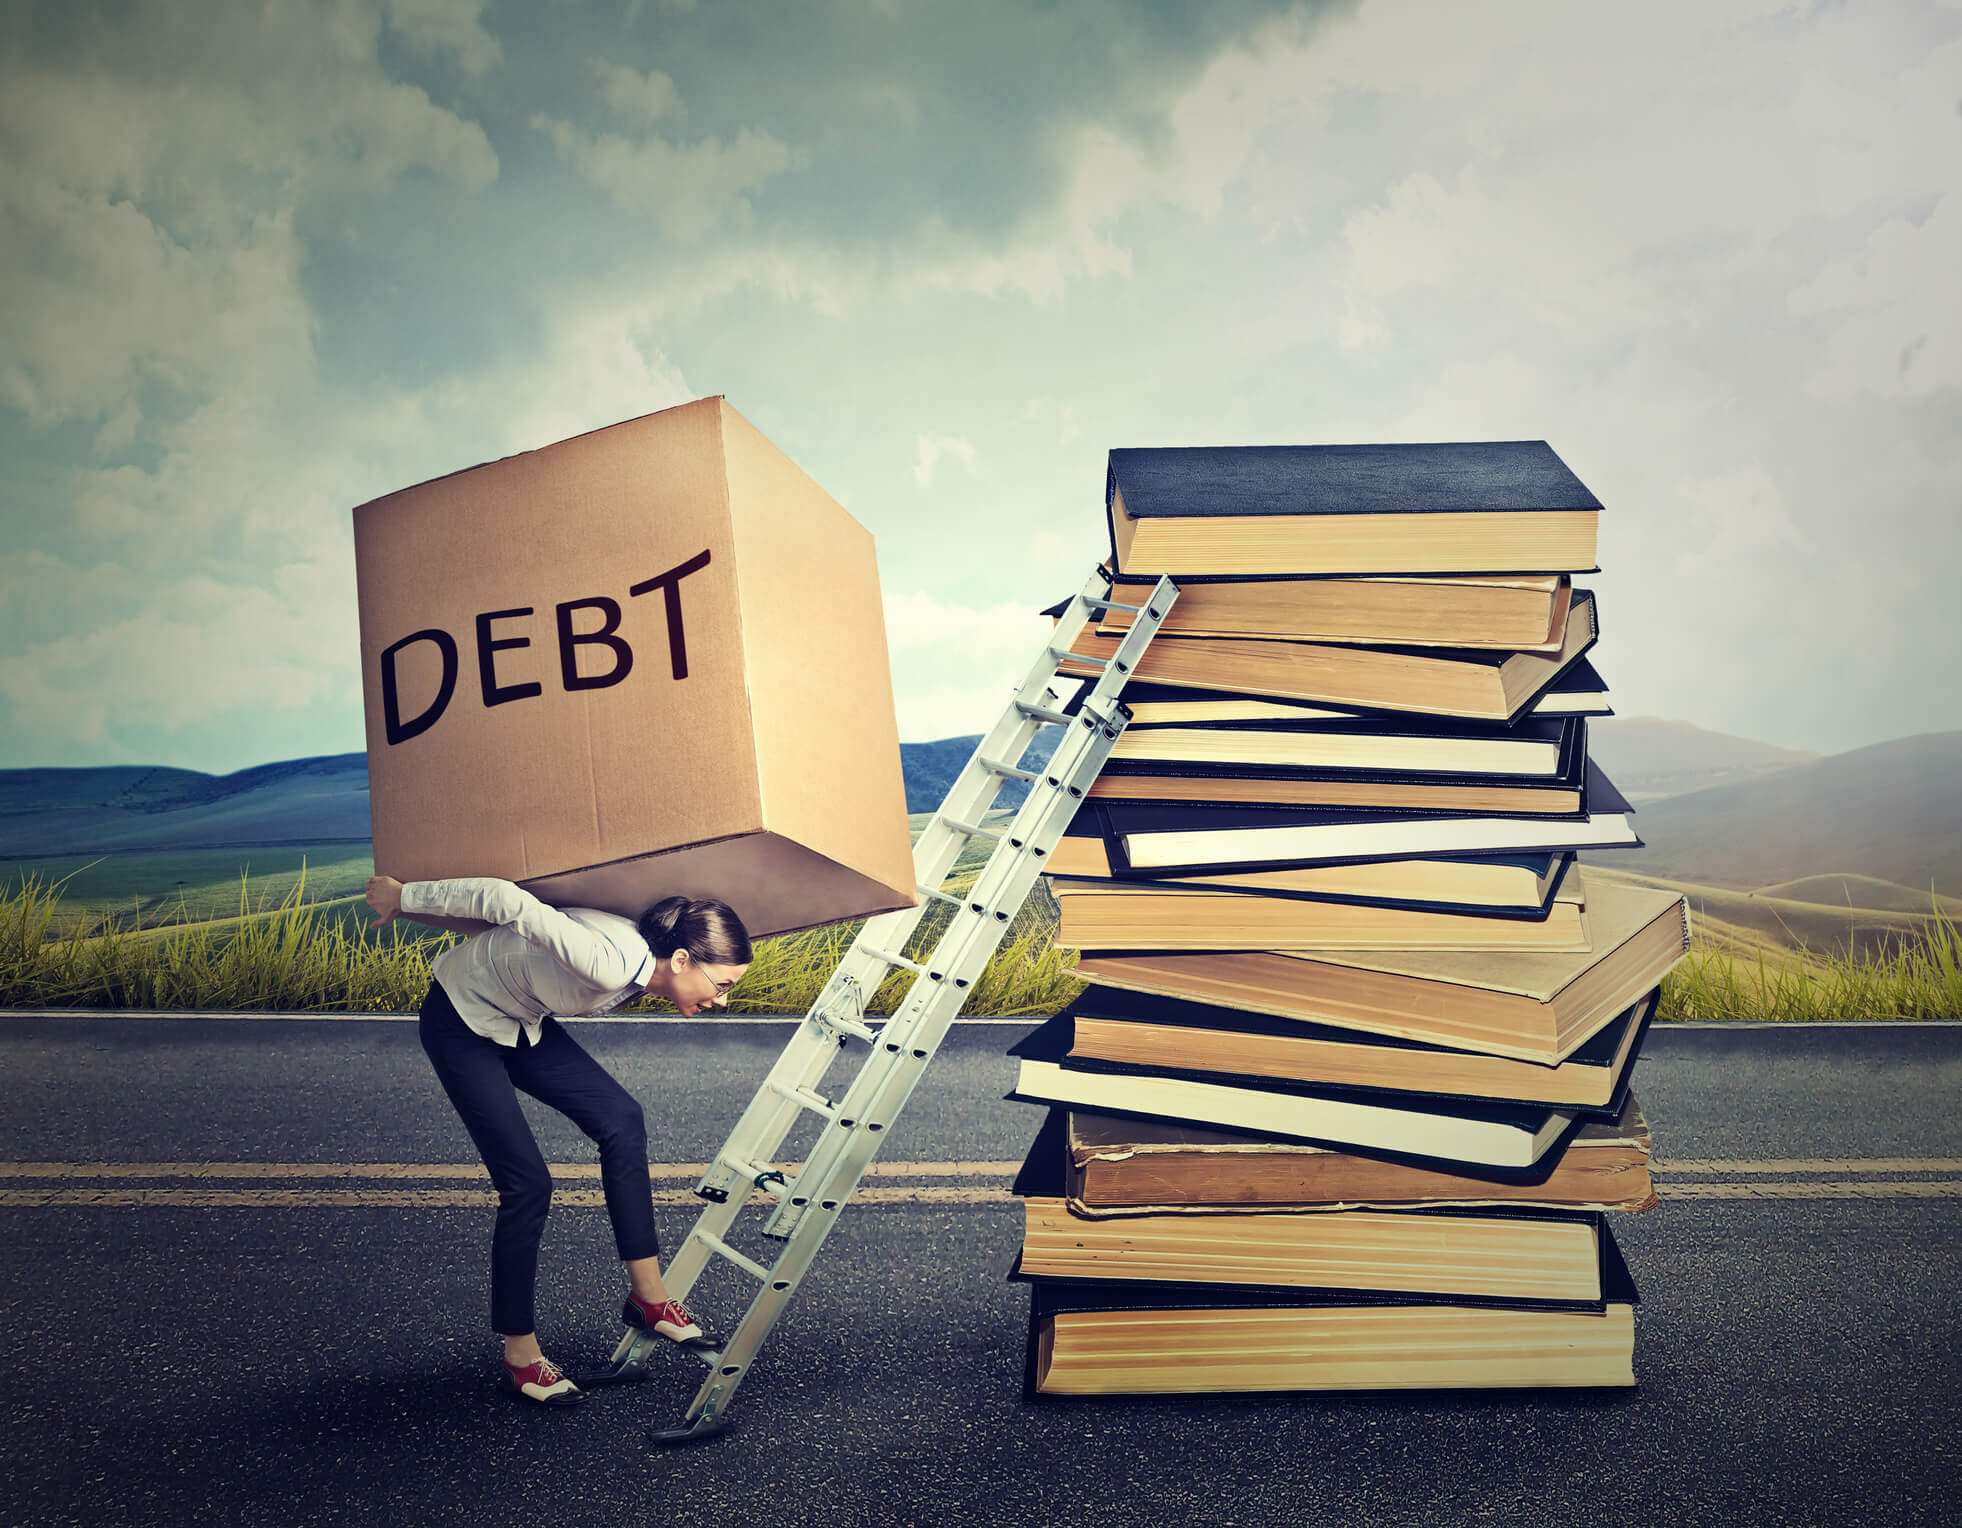 a woman carrying a box with "debt" on the side trying to climb a ladder leaning over a pile of books